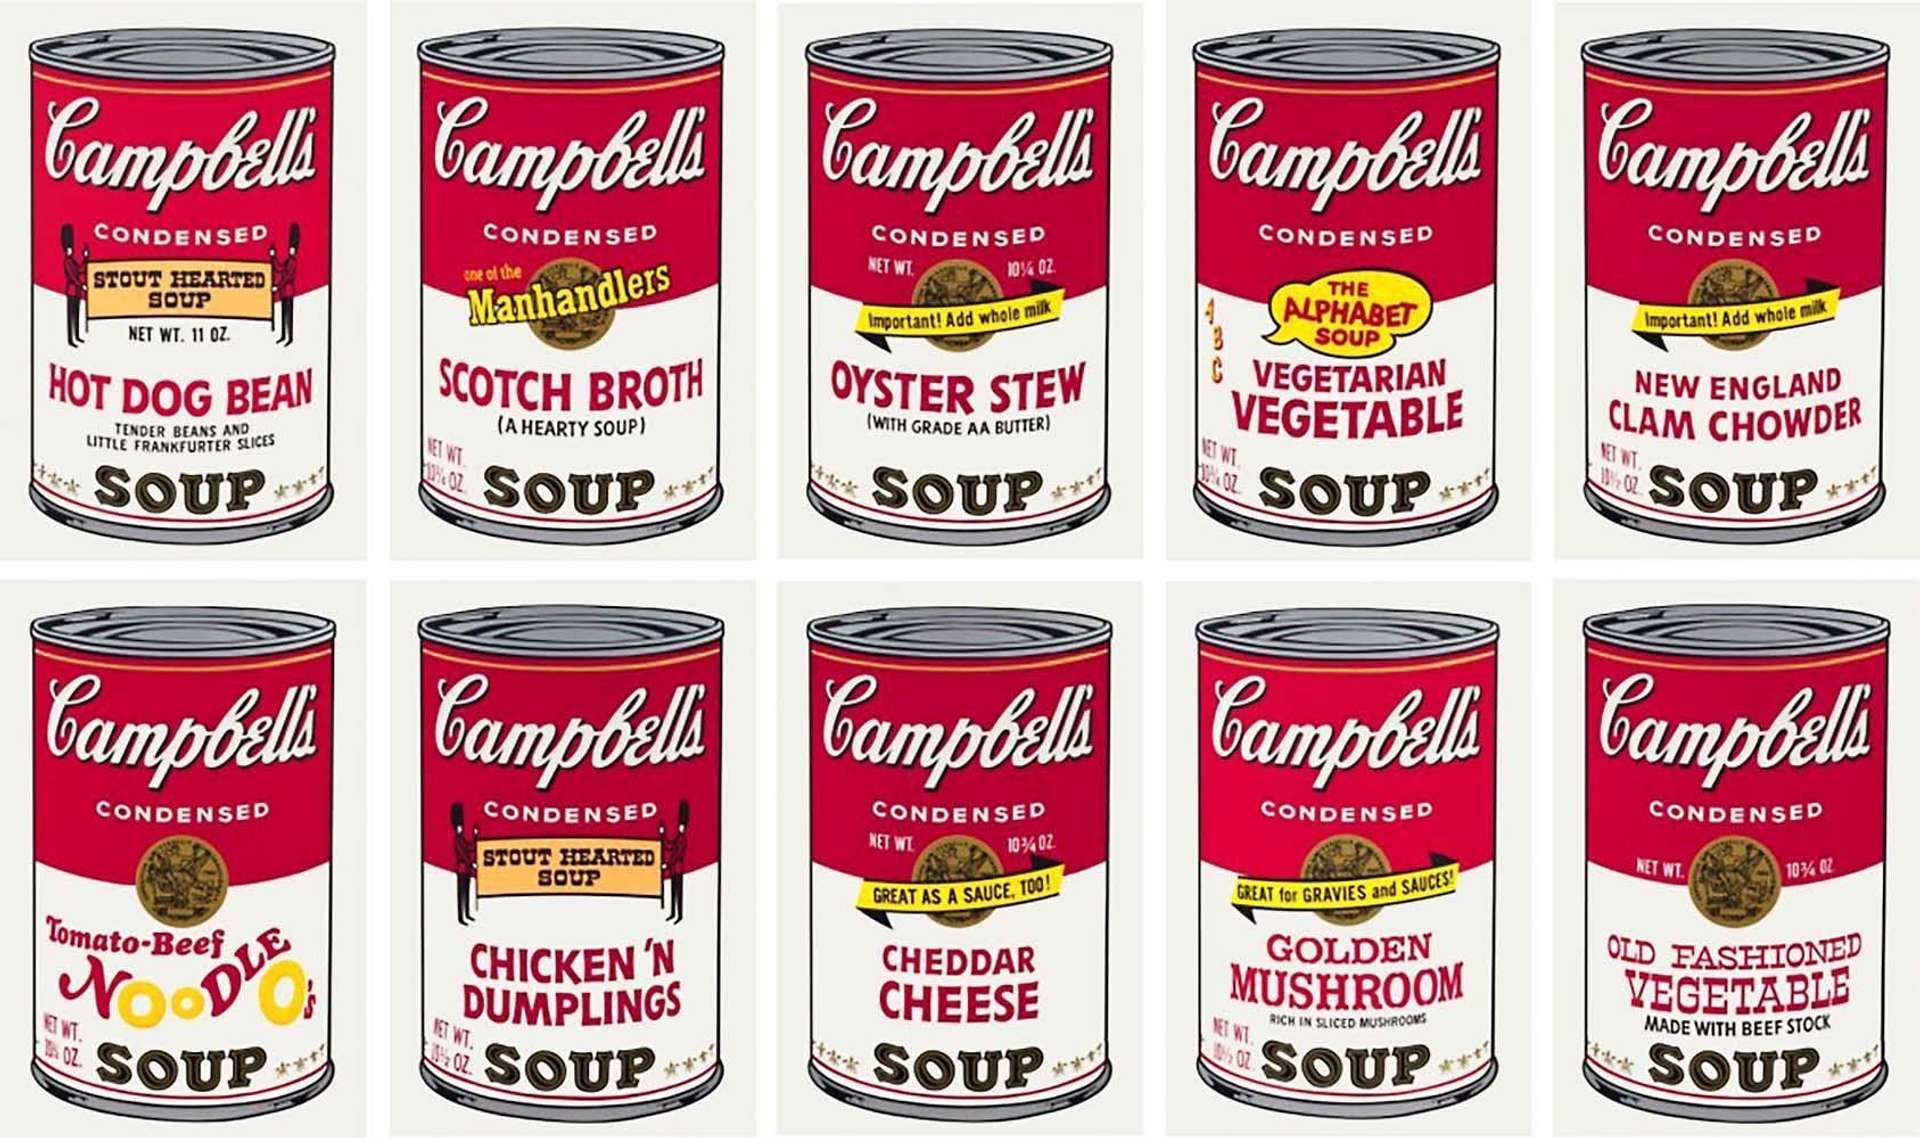 A complete set of Warhol's Campbell's Soup prints, showing several cans of Campbell's Soup in different flavours.